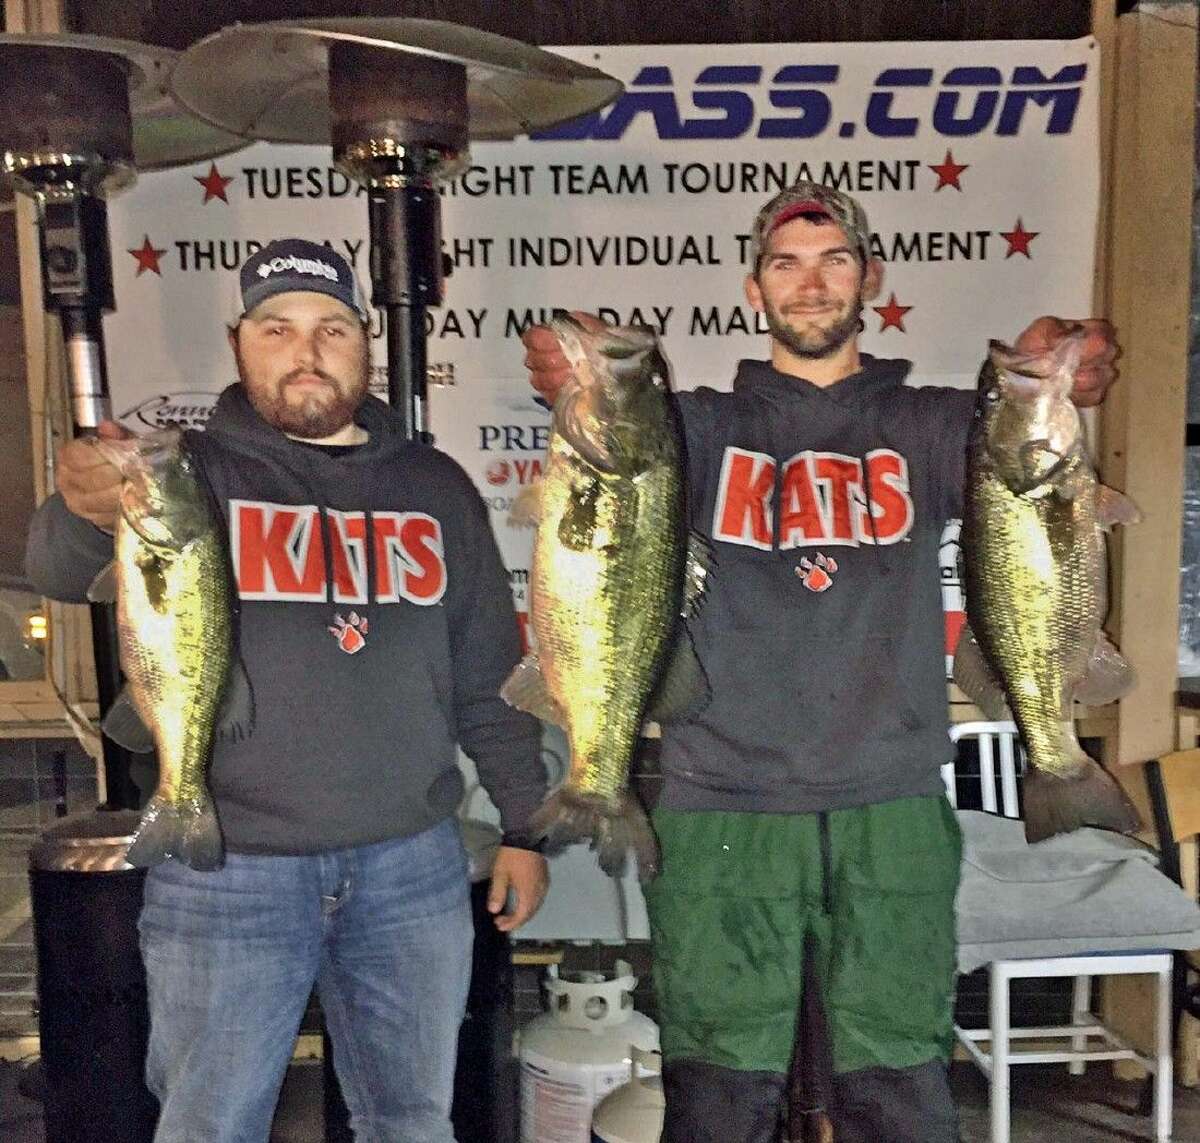 Colby Bryant and Lane Turner came in first place in the CONROEBASS Tuesday tournament with a total stringer weight of 15.53 pounds. They also had big bass that weighed 8.30 pounds.